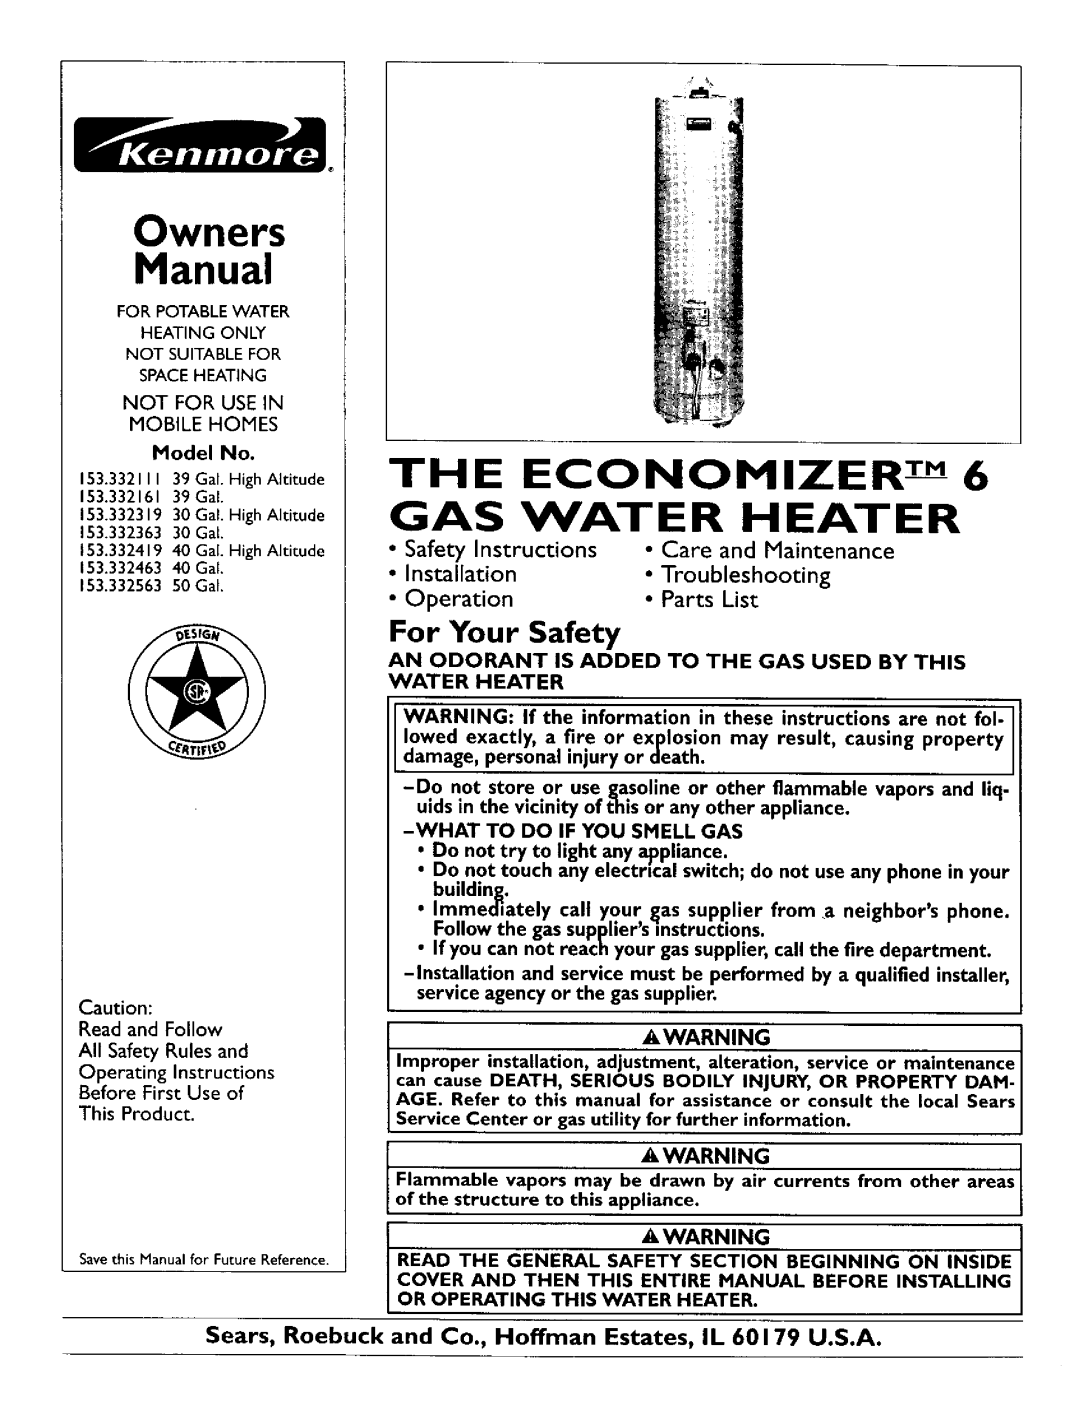 Kenmore 153.332463 owner manual For Your Safety, THE ECONOMIZER T-M6 GAS WATER HEATER, Operation, Installation, Parts List 